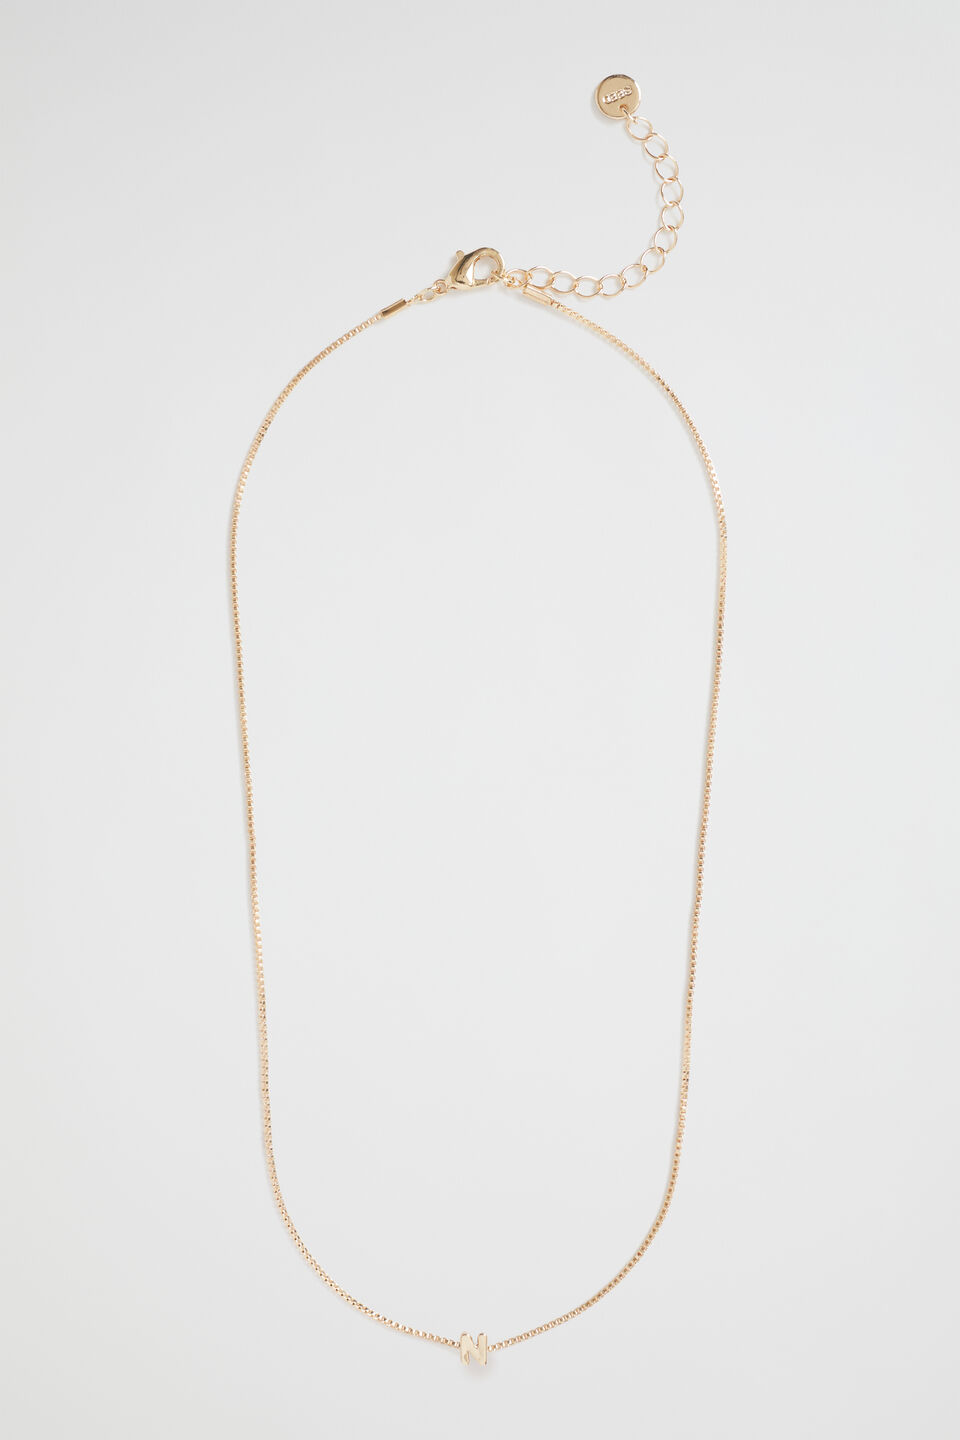 Gold Initial Necklace  N